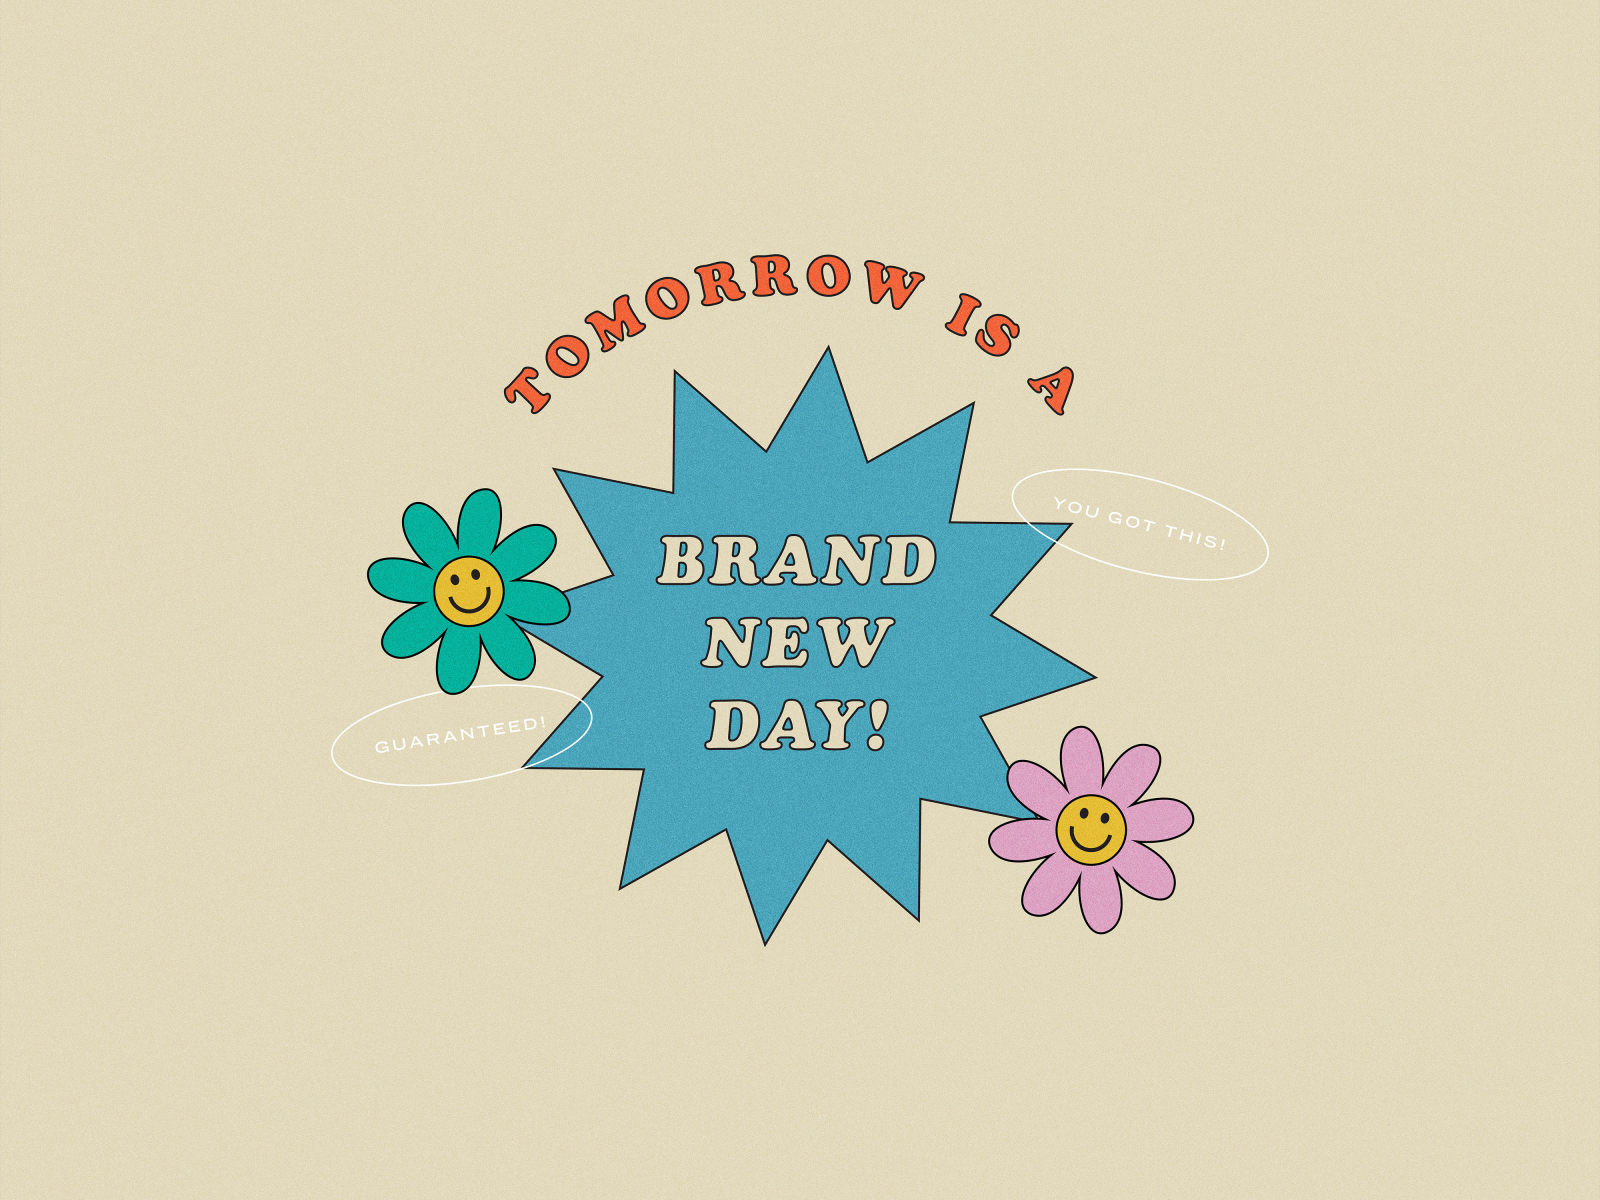 Tomorrow Is A Brand New Day by Tyler Elise Blinderman on Dribbble